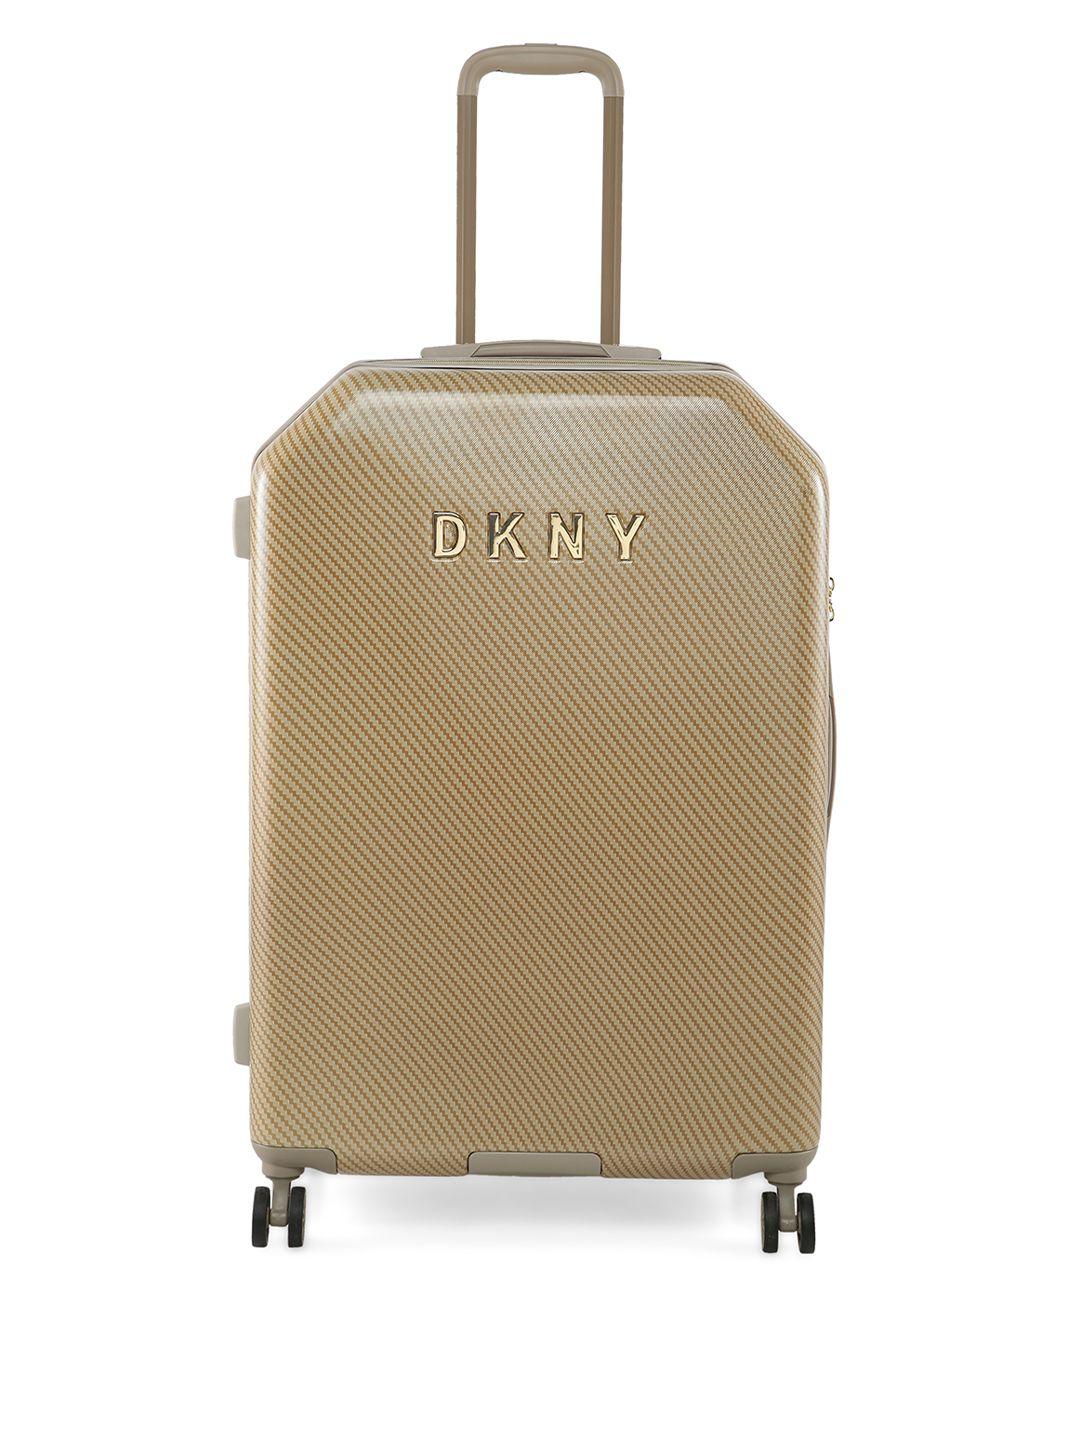 dkny brown printed hard-sided large trolley suitcase